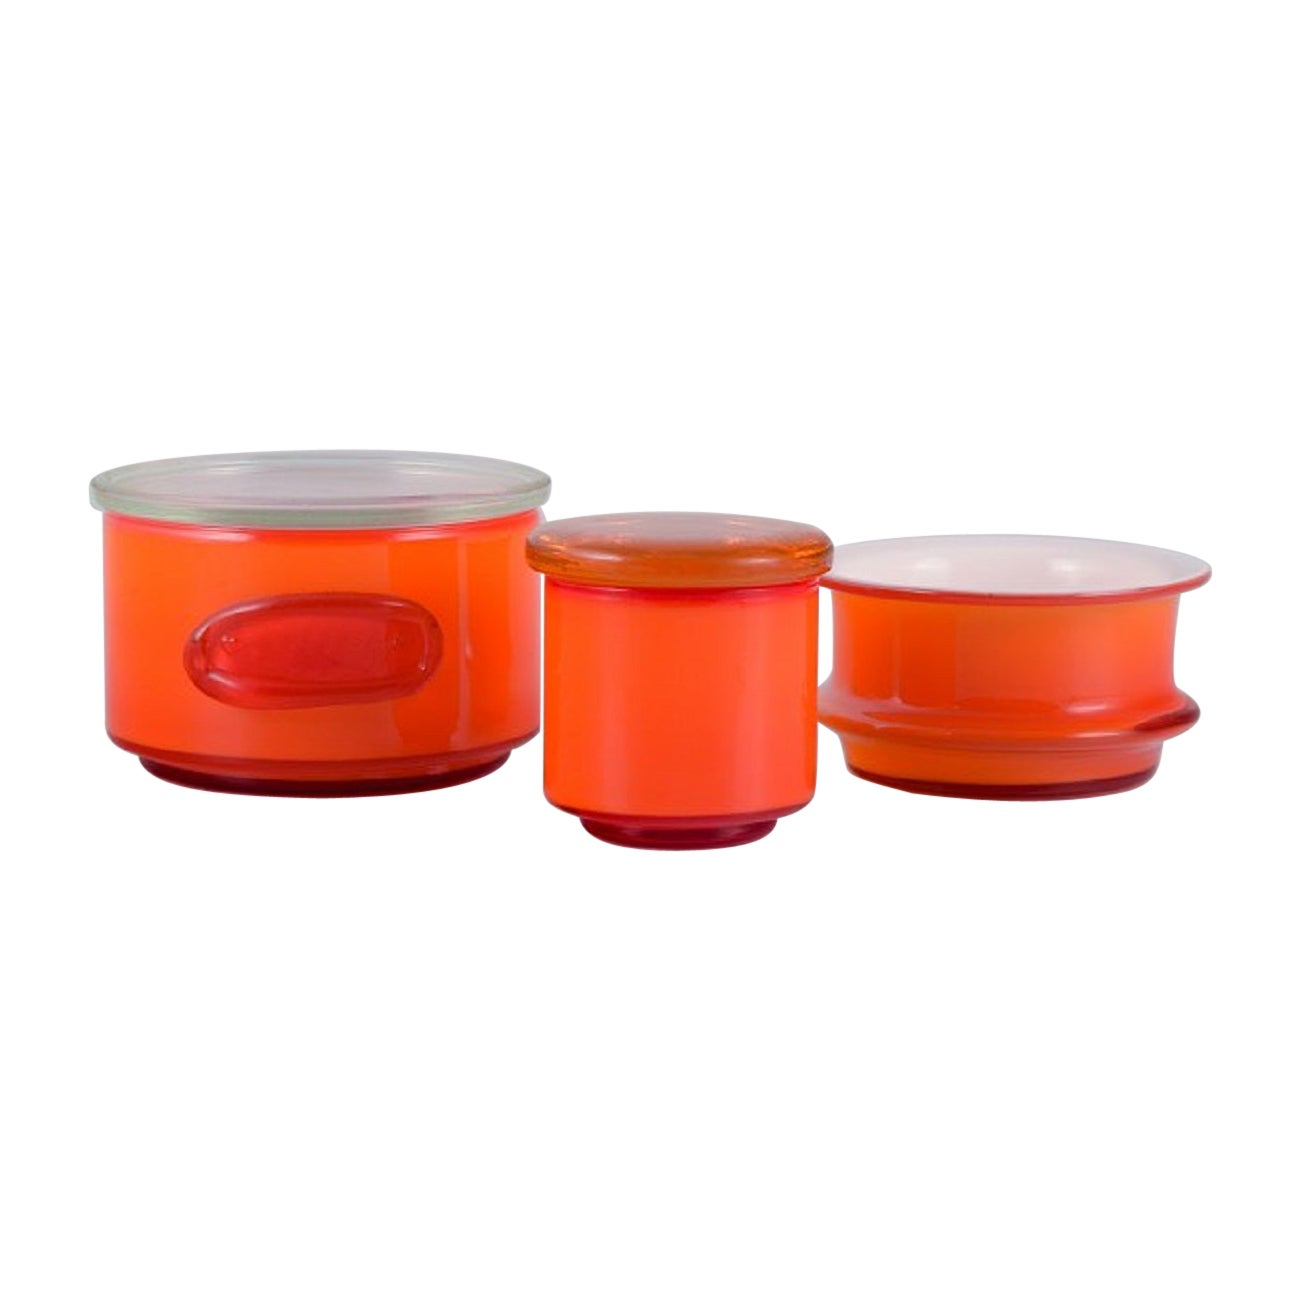 Michael Bang for Holmegaard, Three Bowls in Orange and White Art Glass For Sale